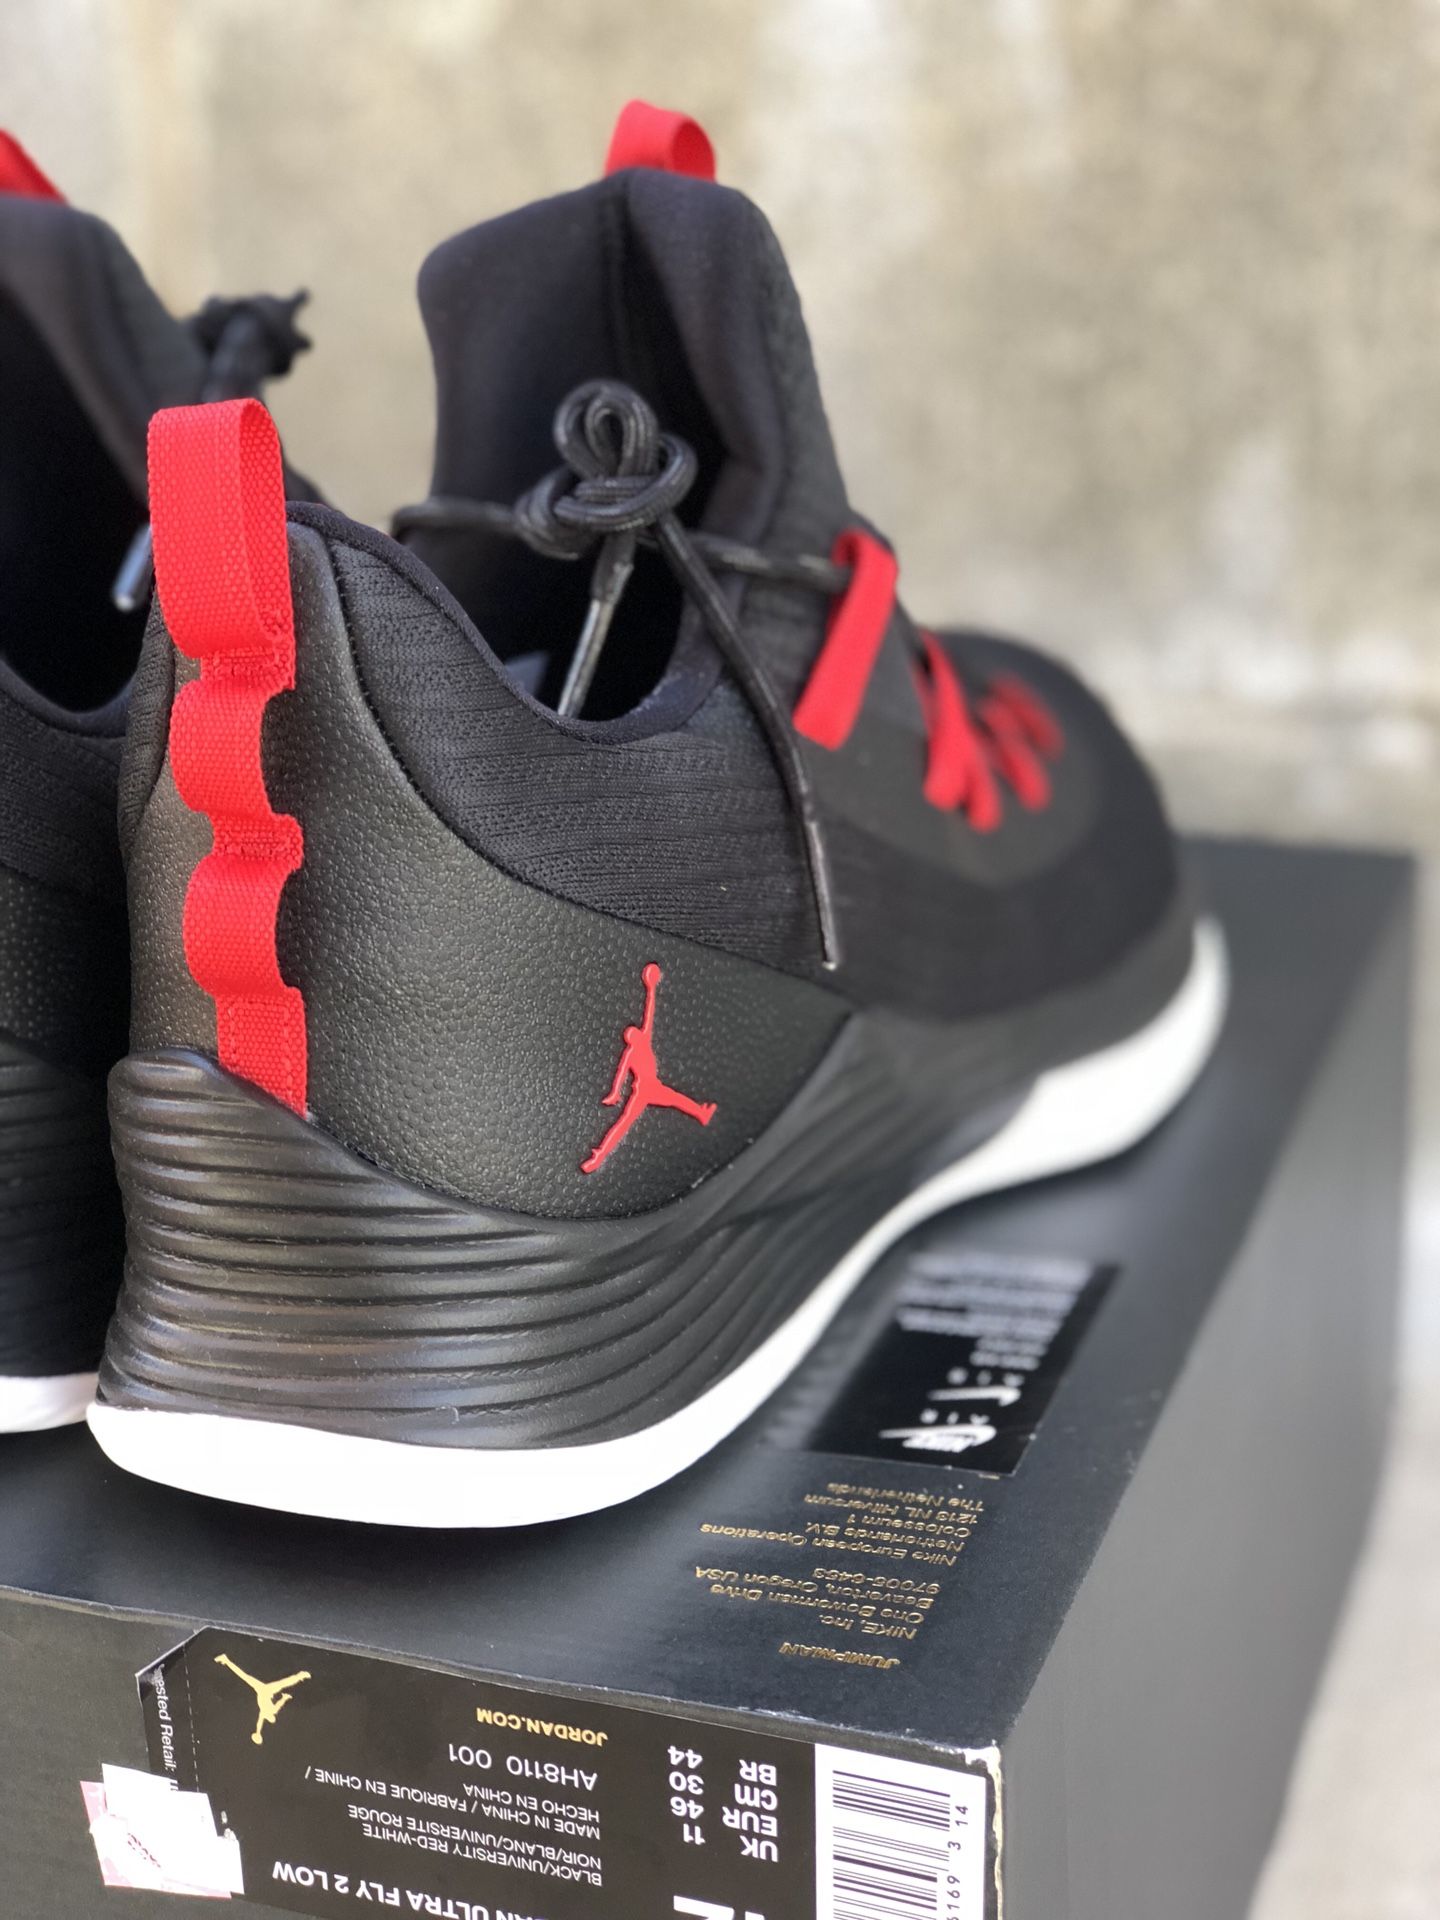 Air Jordan Ultra Fly 2 Basketball shoes 'Bred' 897998-001 Men's size 9.5  for Sale in Santee, CA - OfferUp